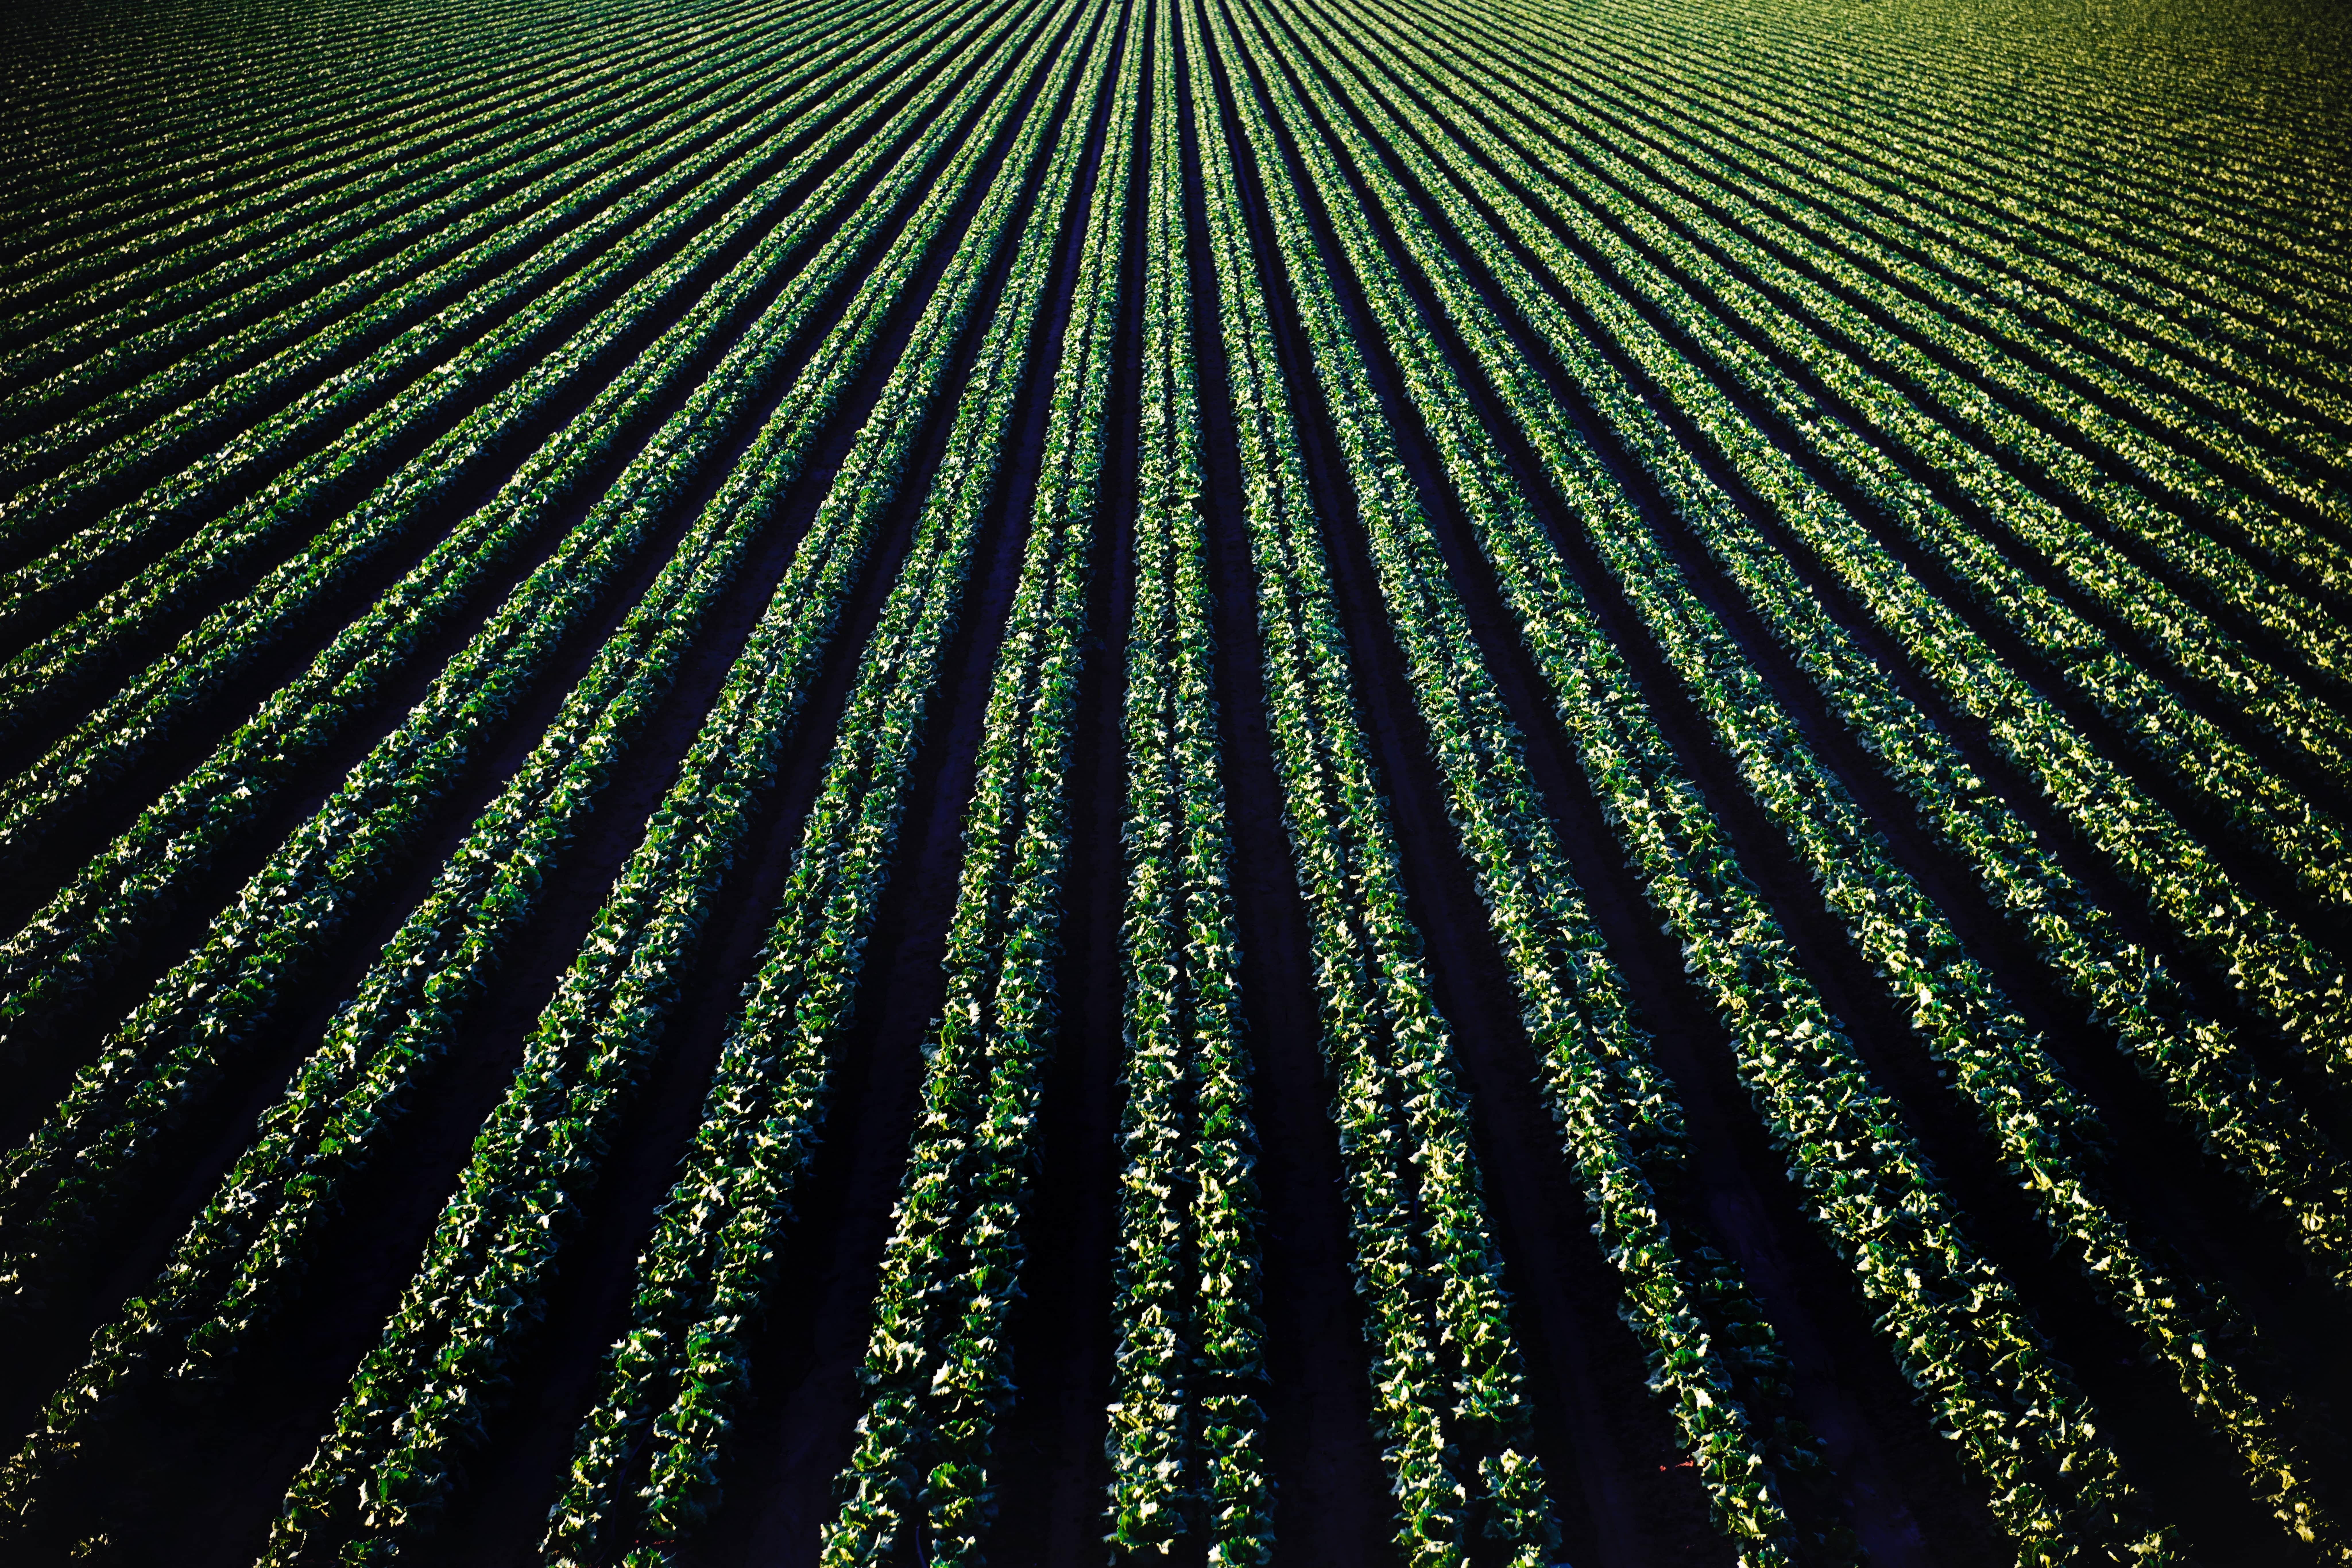 Uniform rows of green crops from above